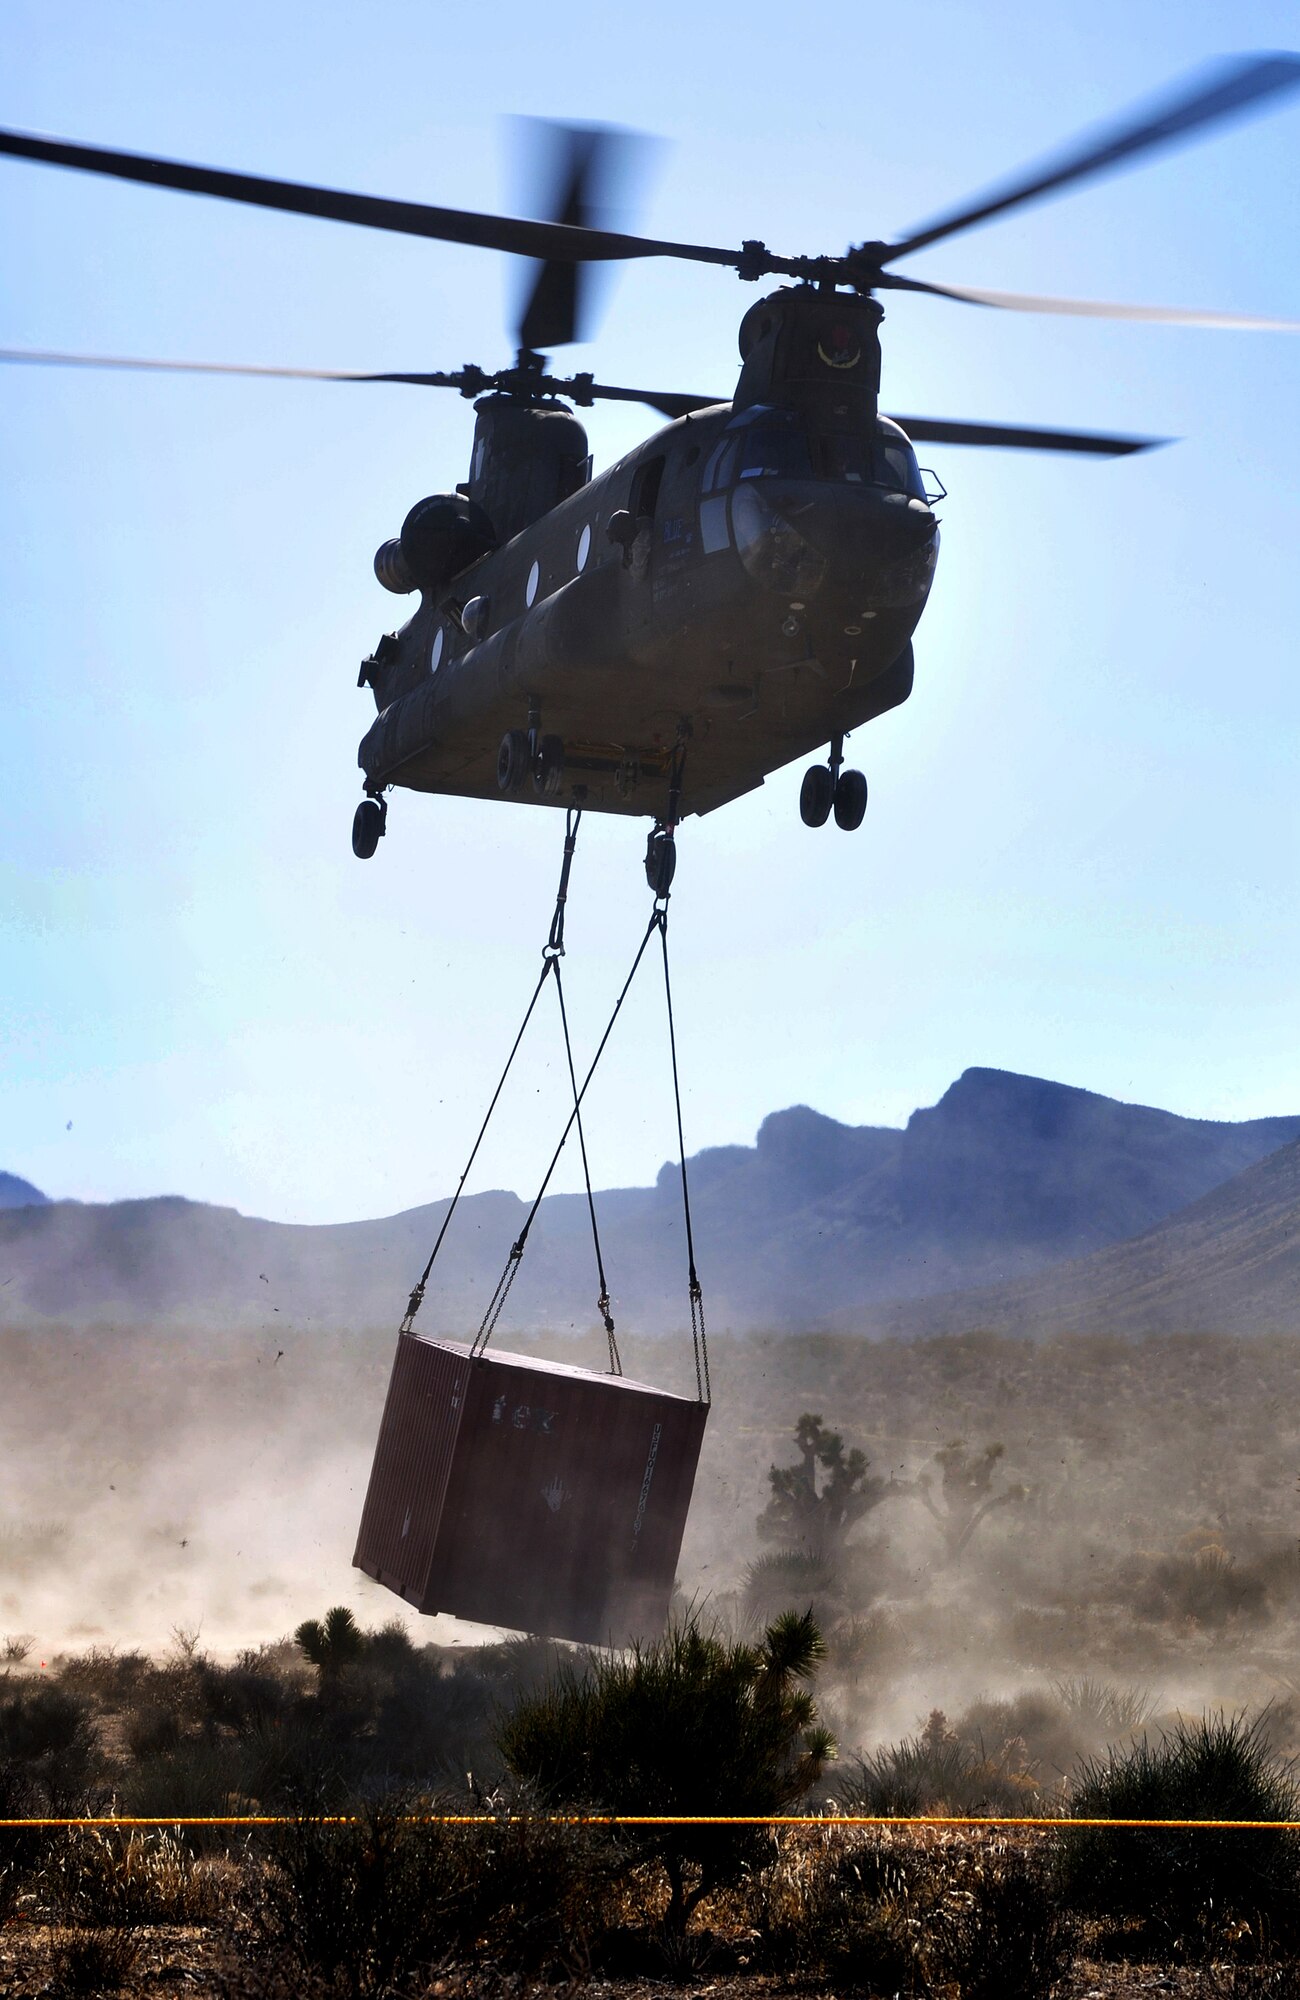 A U.S. Army National Guard CH-47 Chinook, Stockton, CA, transports a Conex container to a designated recovery site during a peacetime operation Nov. 9, 2011, near Alamo, Nev.The quick response joint sling load and airlift operation was conducted by the U.S. ARNG CH-47 helo unit, Stockton, CA, and the U.S. Air Force 820th RED HORSE Squadron airborne flight, Nellis Air Force Base, Nev. (U.S. Air Force photo by Tech Sgt. Bob Sommer/Released)